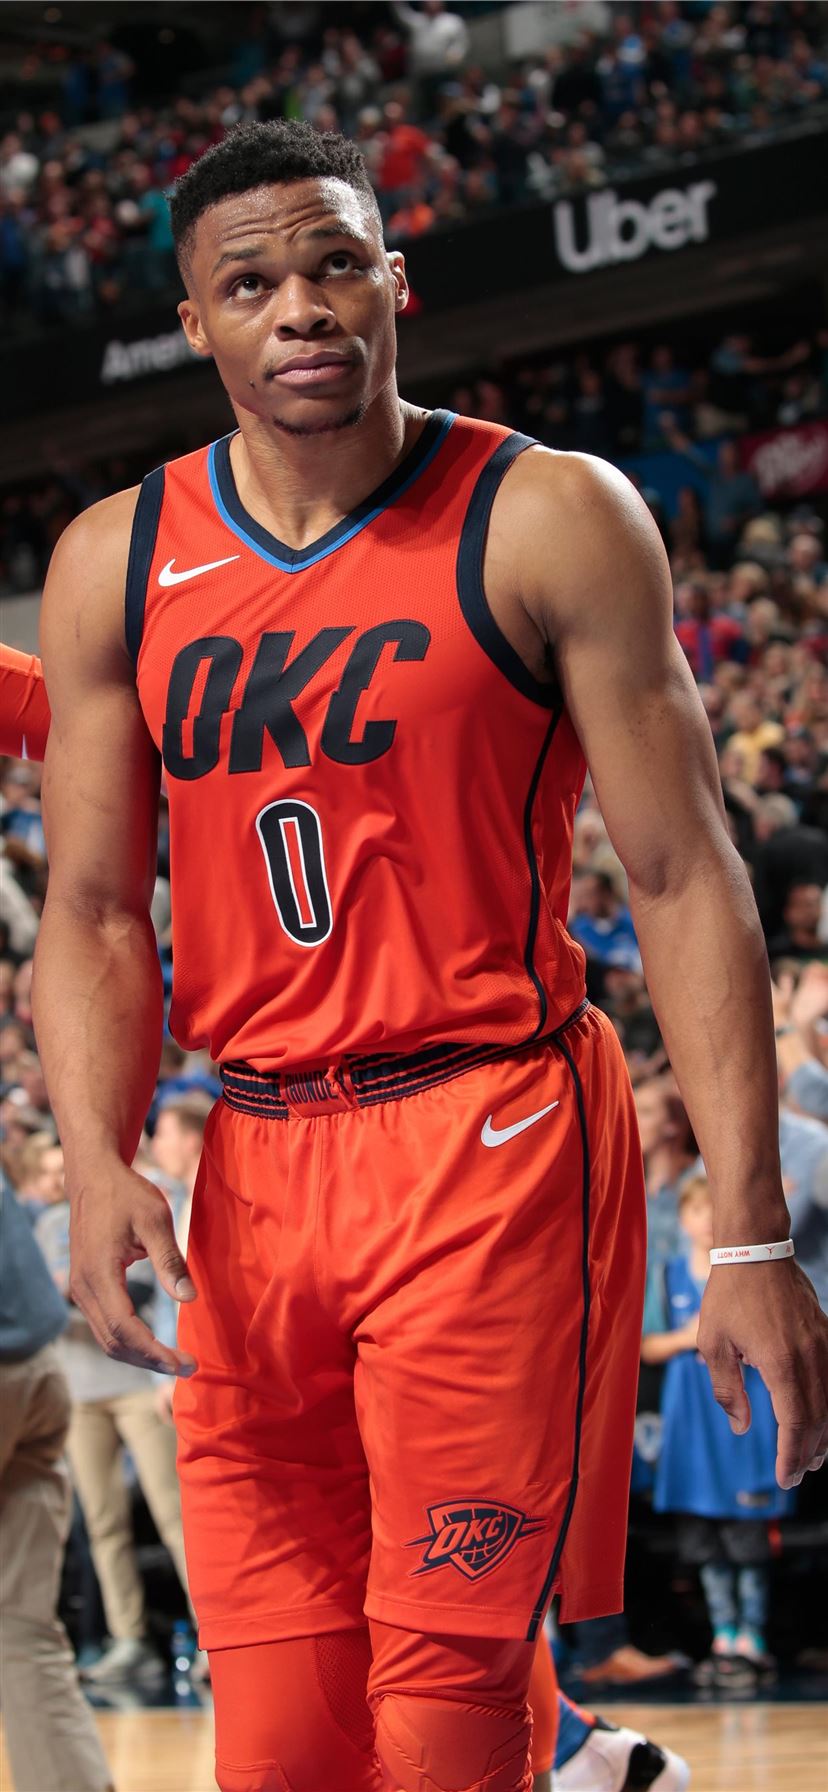 God Bless Russell Westbrook, May He Never Change | GQ